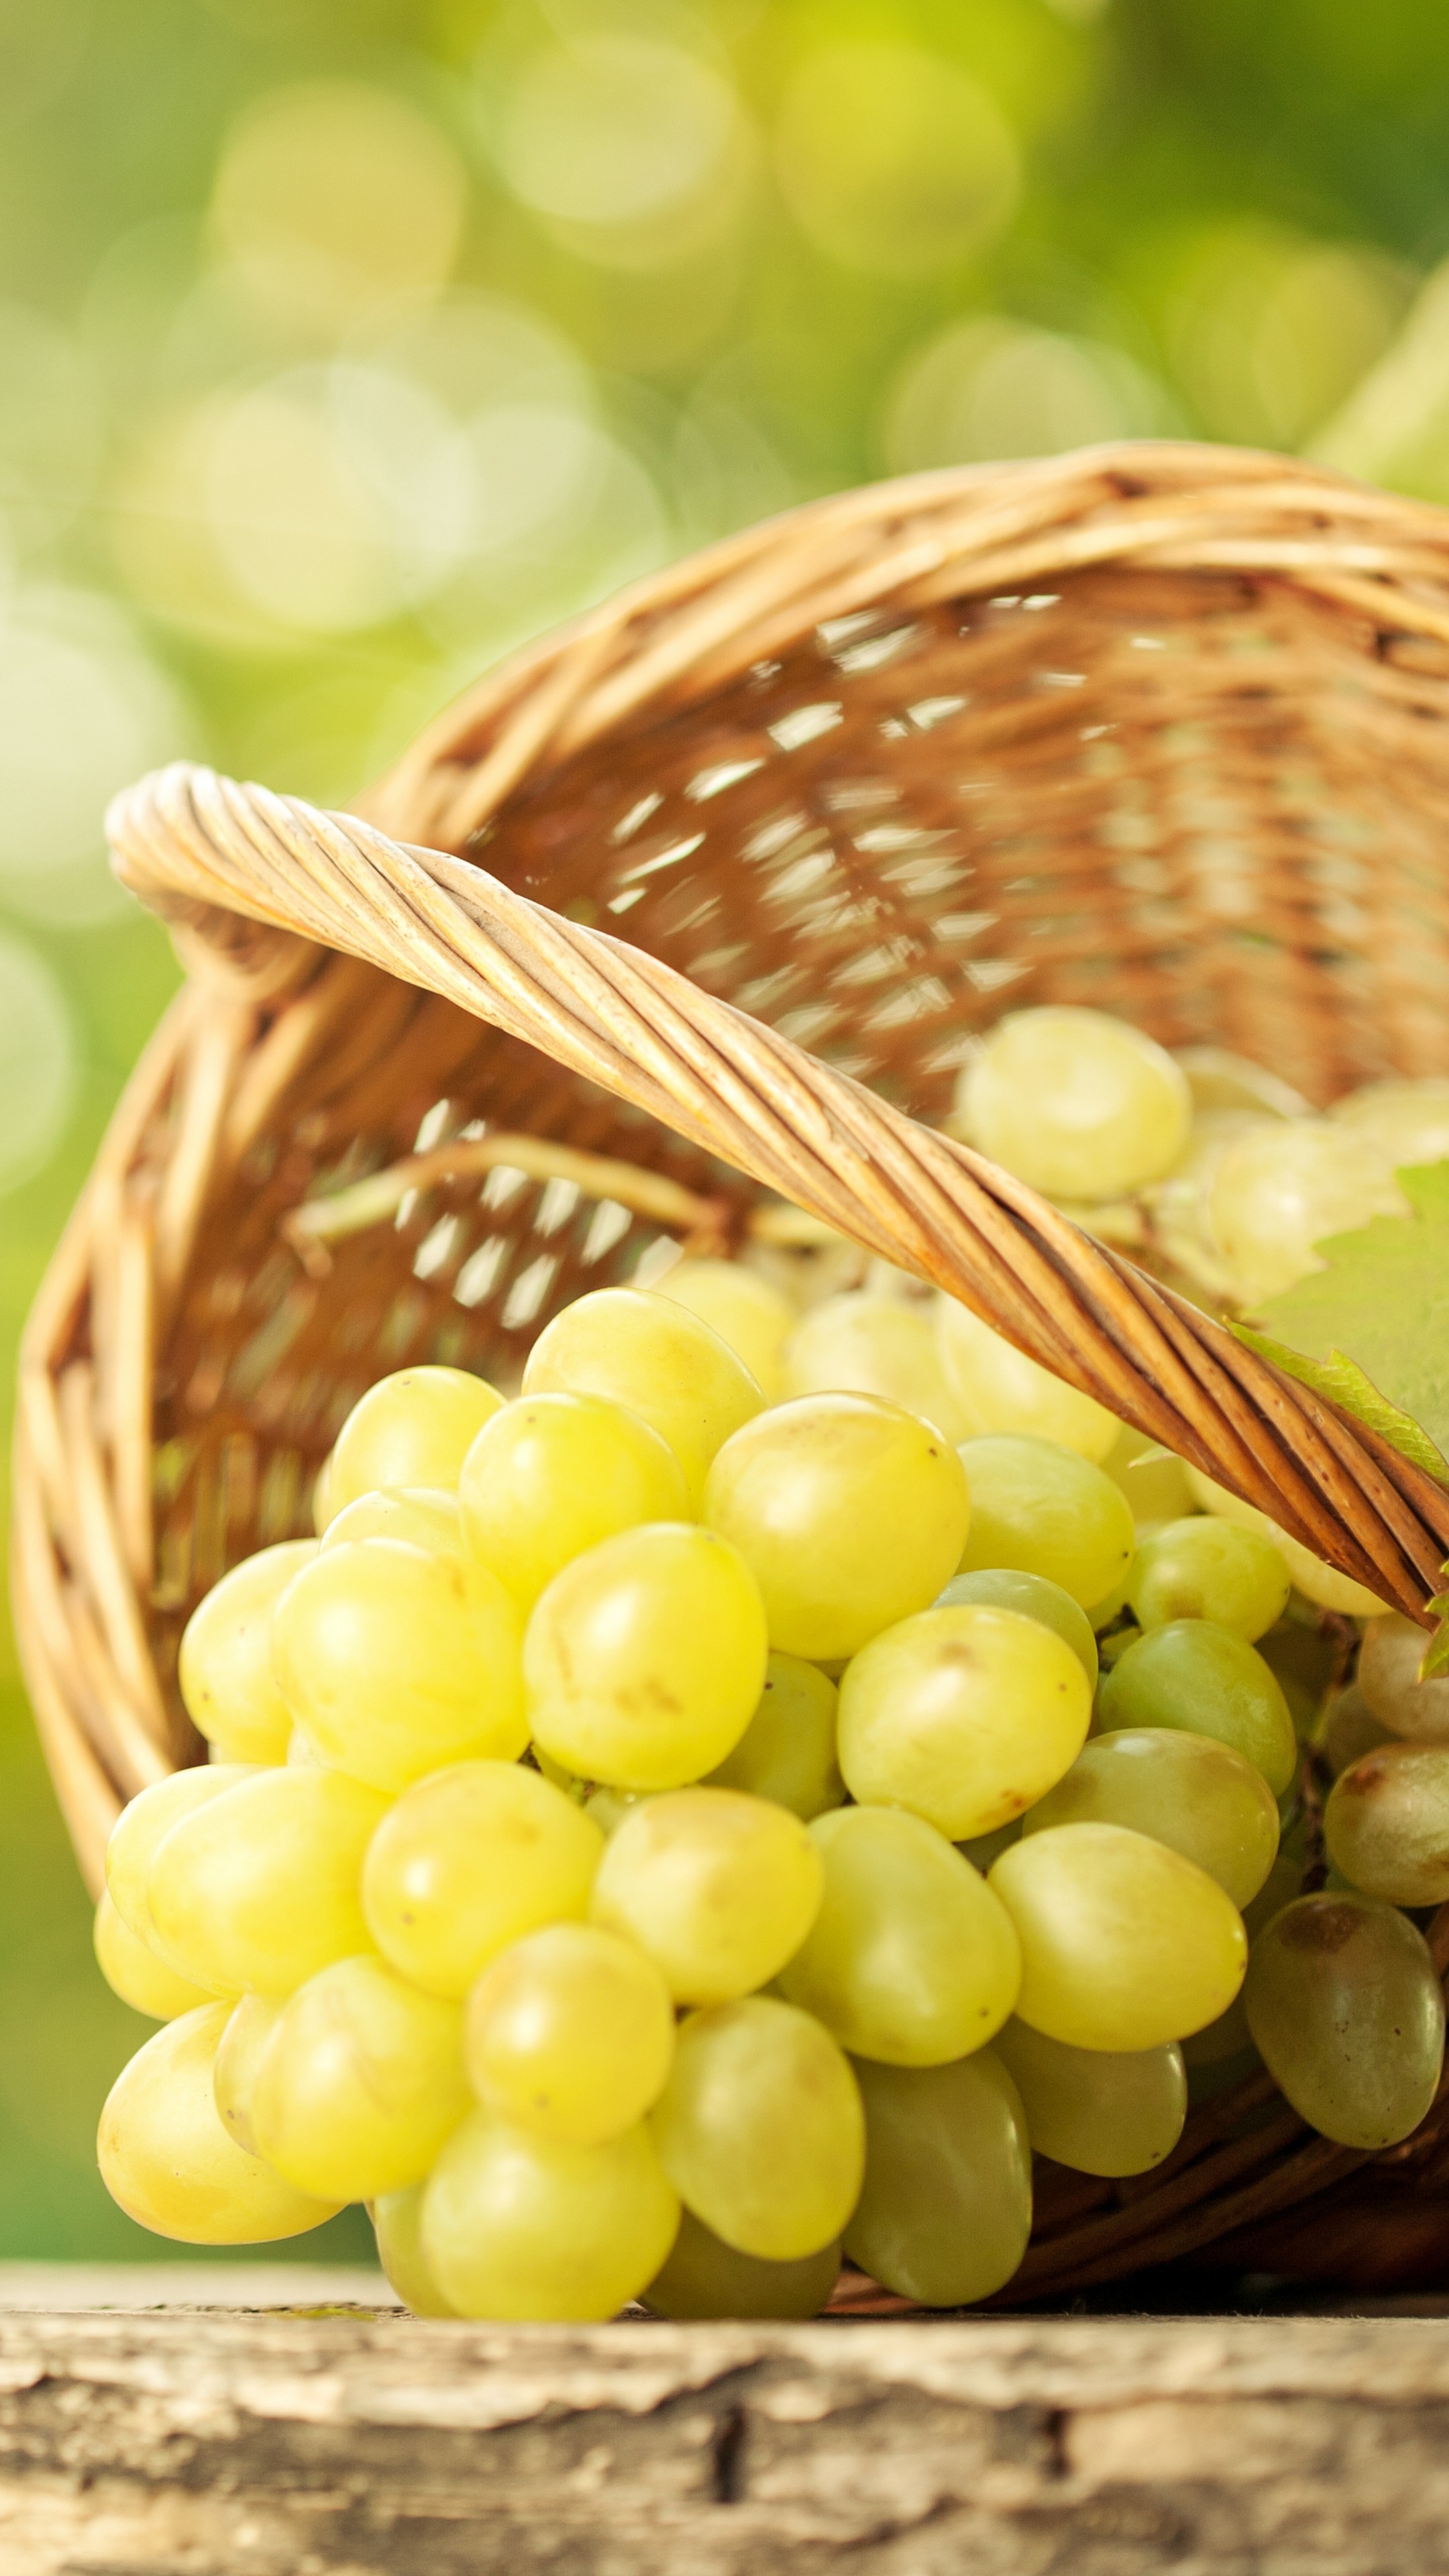 Grapes: Hold cultural significance in many parts of the world, particularly for their role in winemaking. 2160x3840 4K Background.